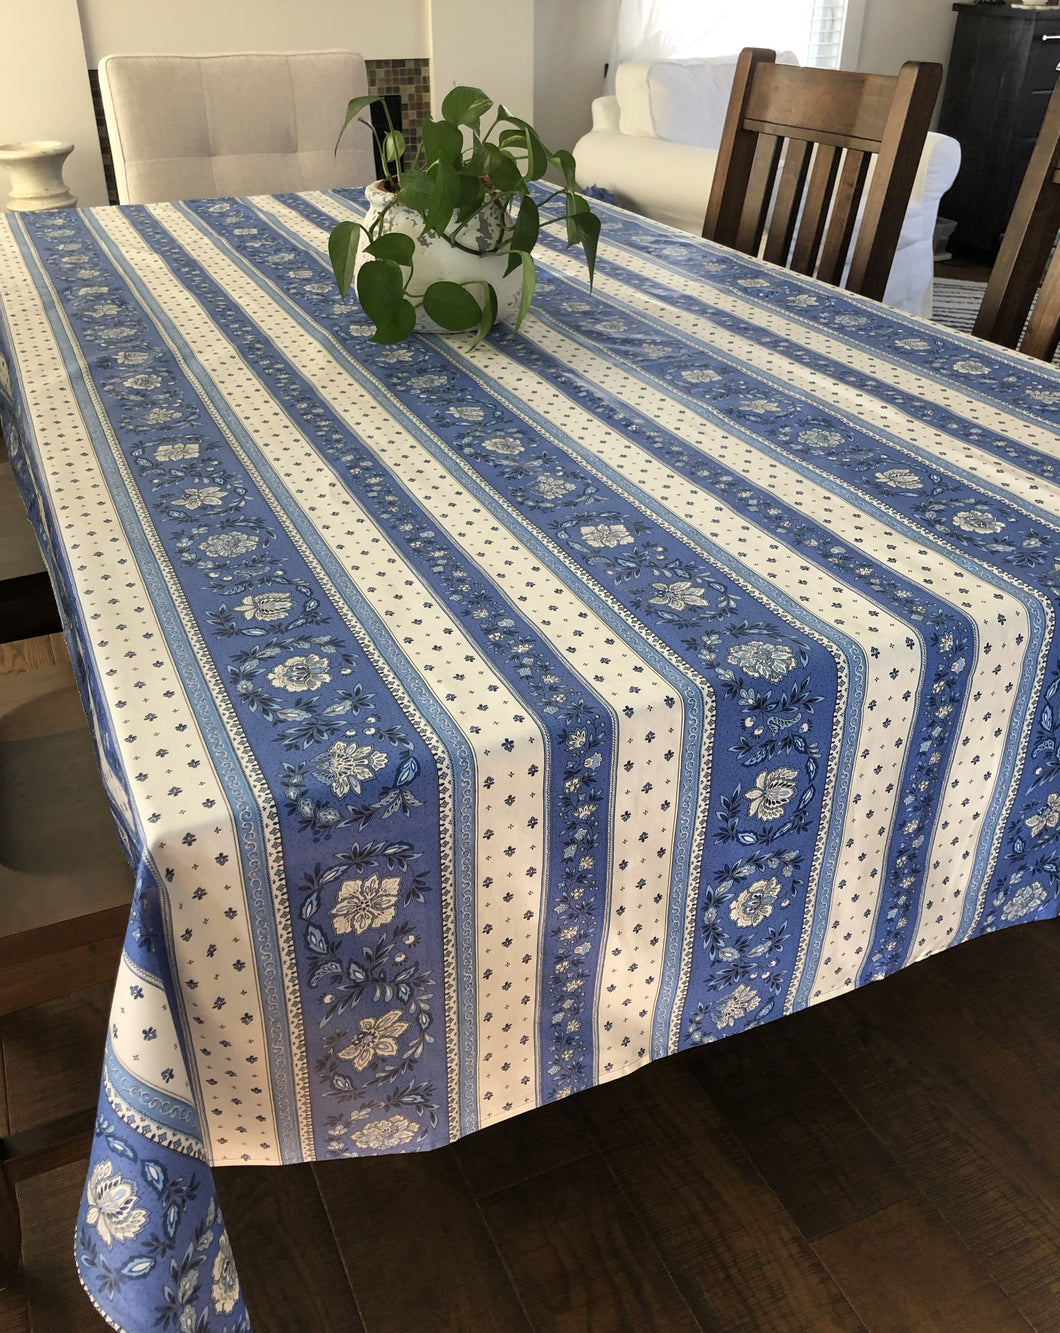 Vence Rectangular Tablecloth - Coated Cotton - Blue/White